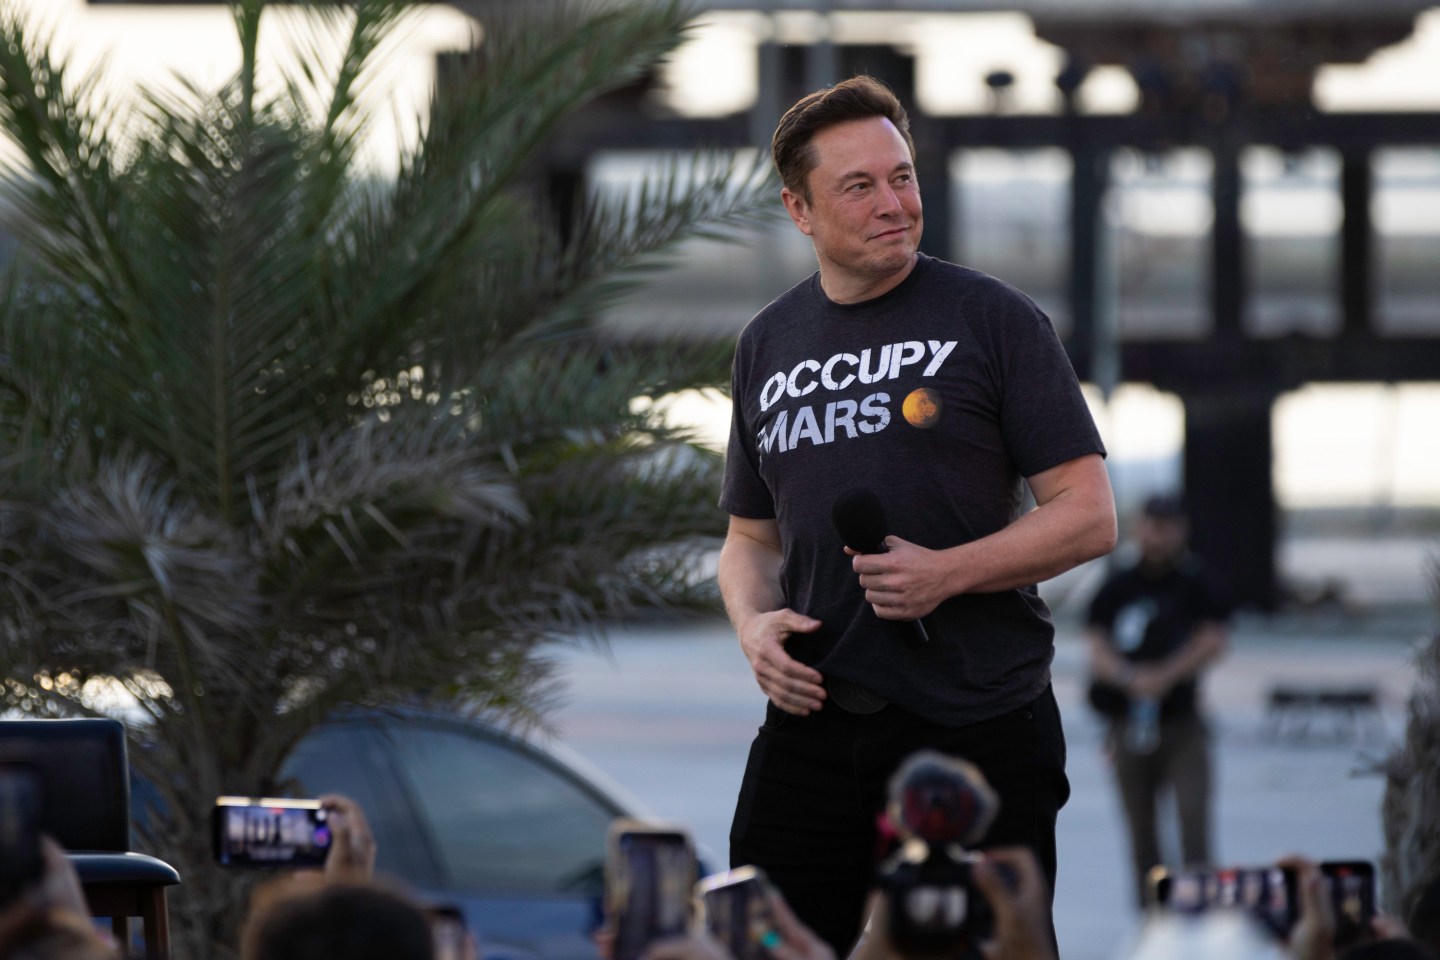 BOCA CHICA BEACH, TX &#8211; AUGUST 25: SpaceX founder Elon Musk walks on stage during a T-Mobile and SpaceX joint event on August 25, 2022 in Boca Chica Beach, Texas. The two companies announced plans to work together to provide T-Mobile cellular service using Starlink satellites. (Photo by Michael Gonzalez/Getty Images)